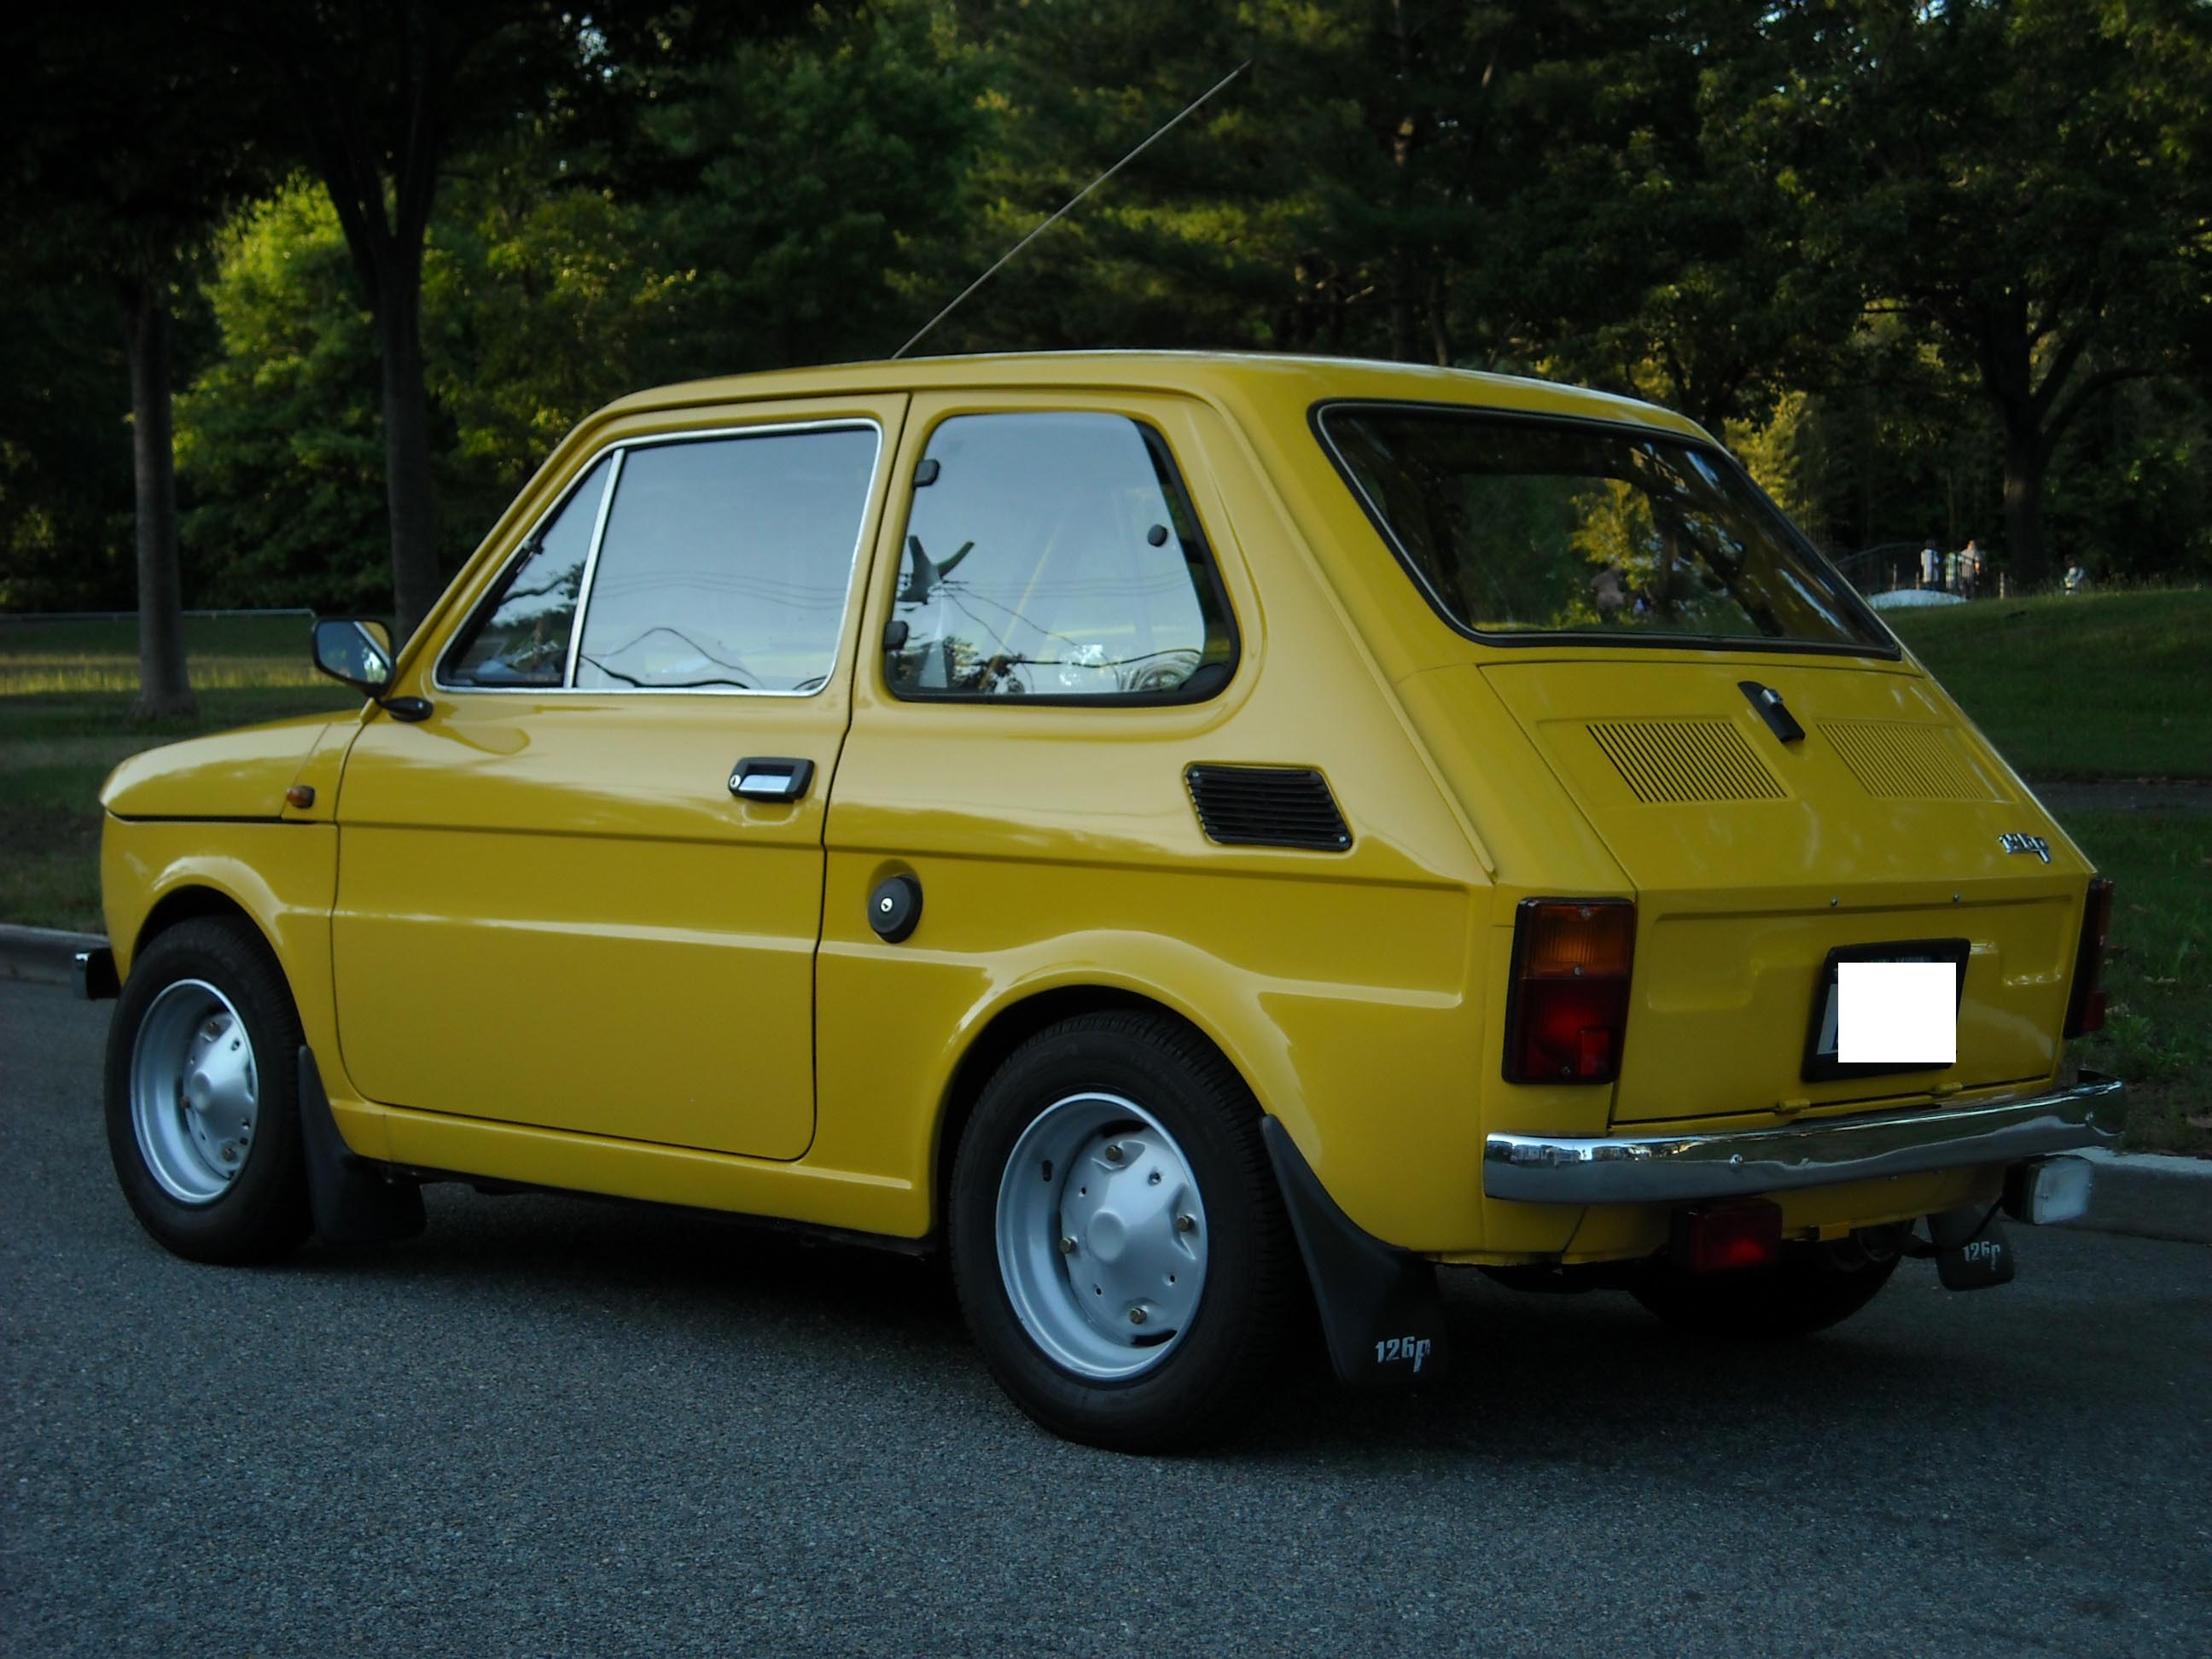 General For Sale 1976 Fiat 126 P in the US The FIAT Forum